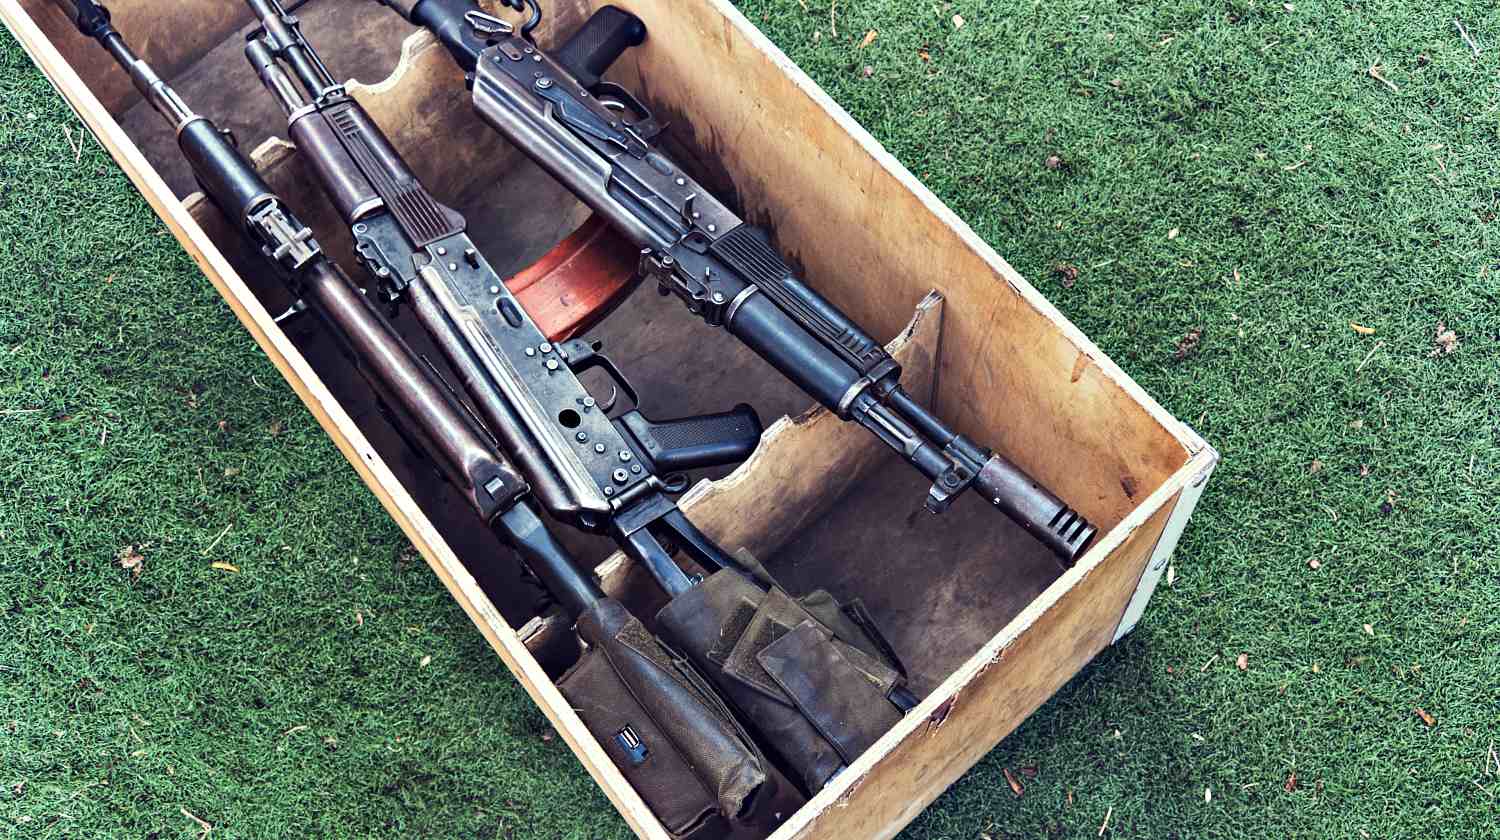 Featured | An automatic weapon with a sniper scope in wood box | Hidden Gun Storage Ideas | Picture Frame Gun Storage & More